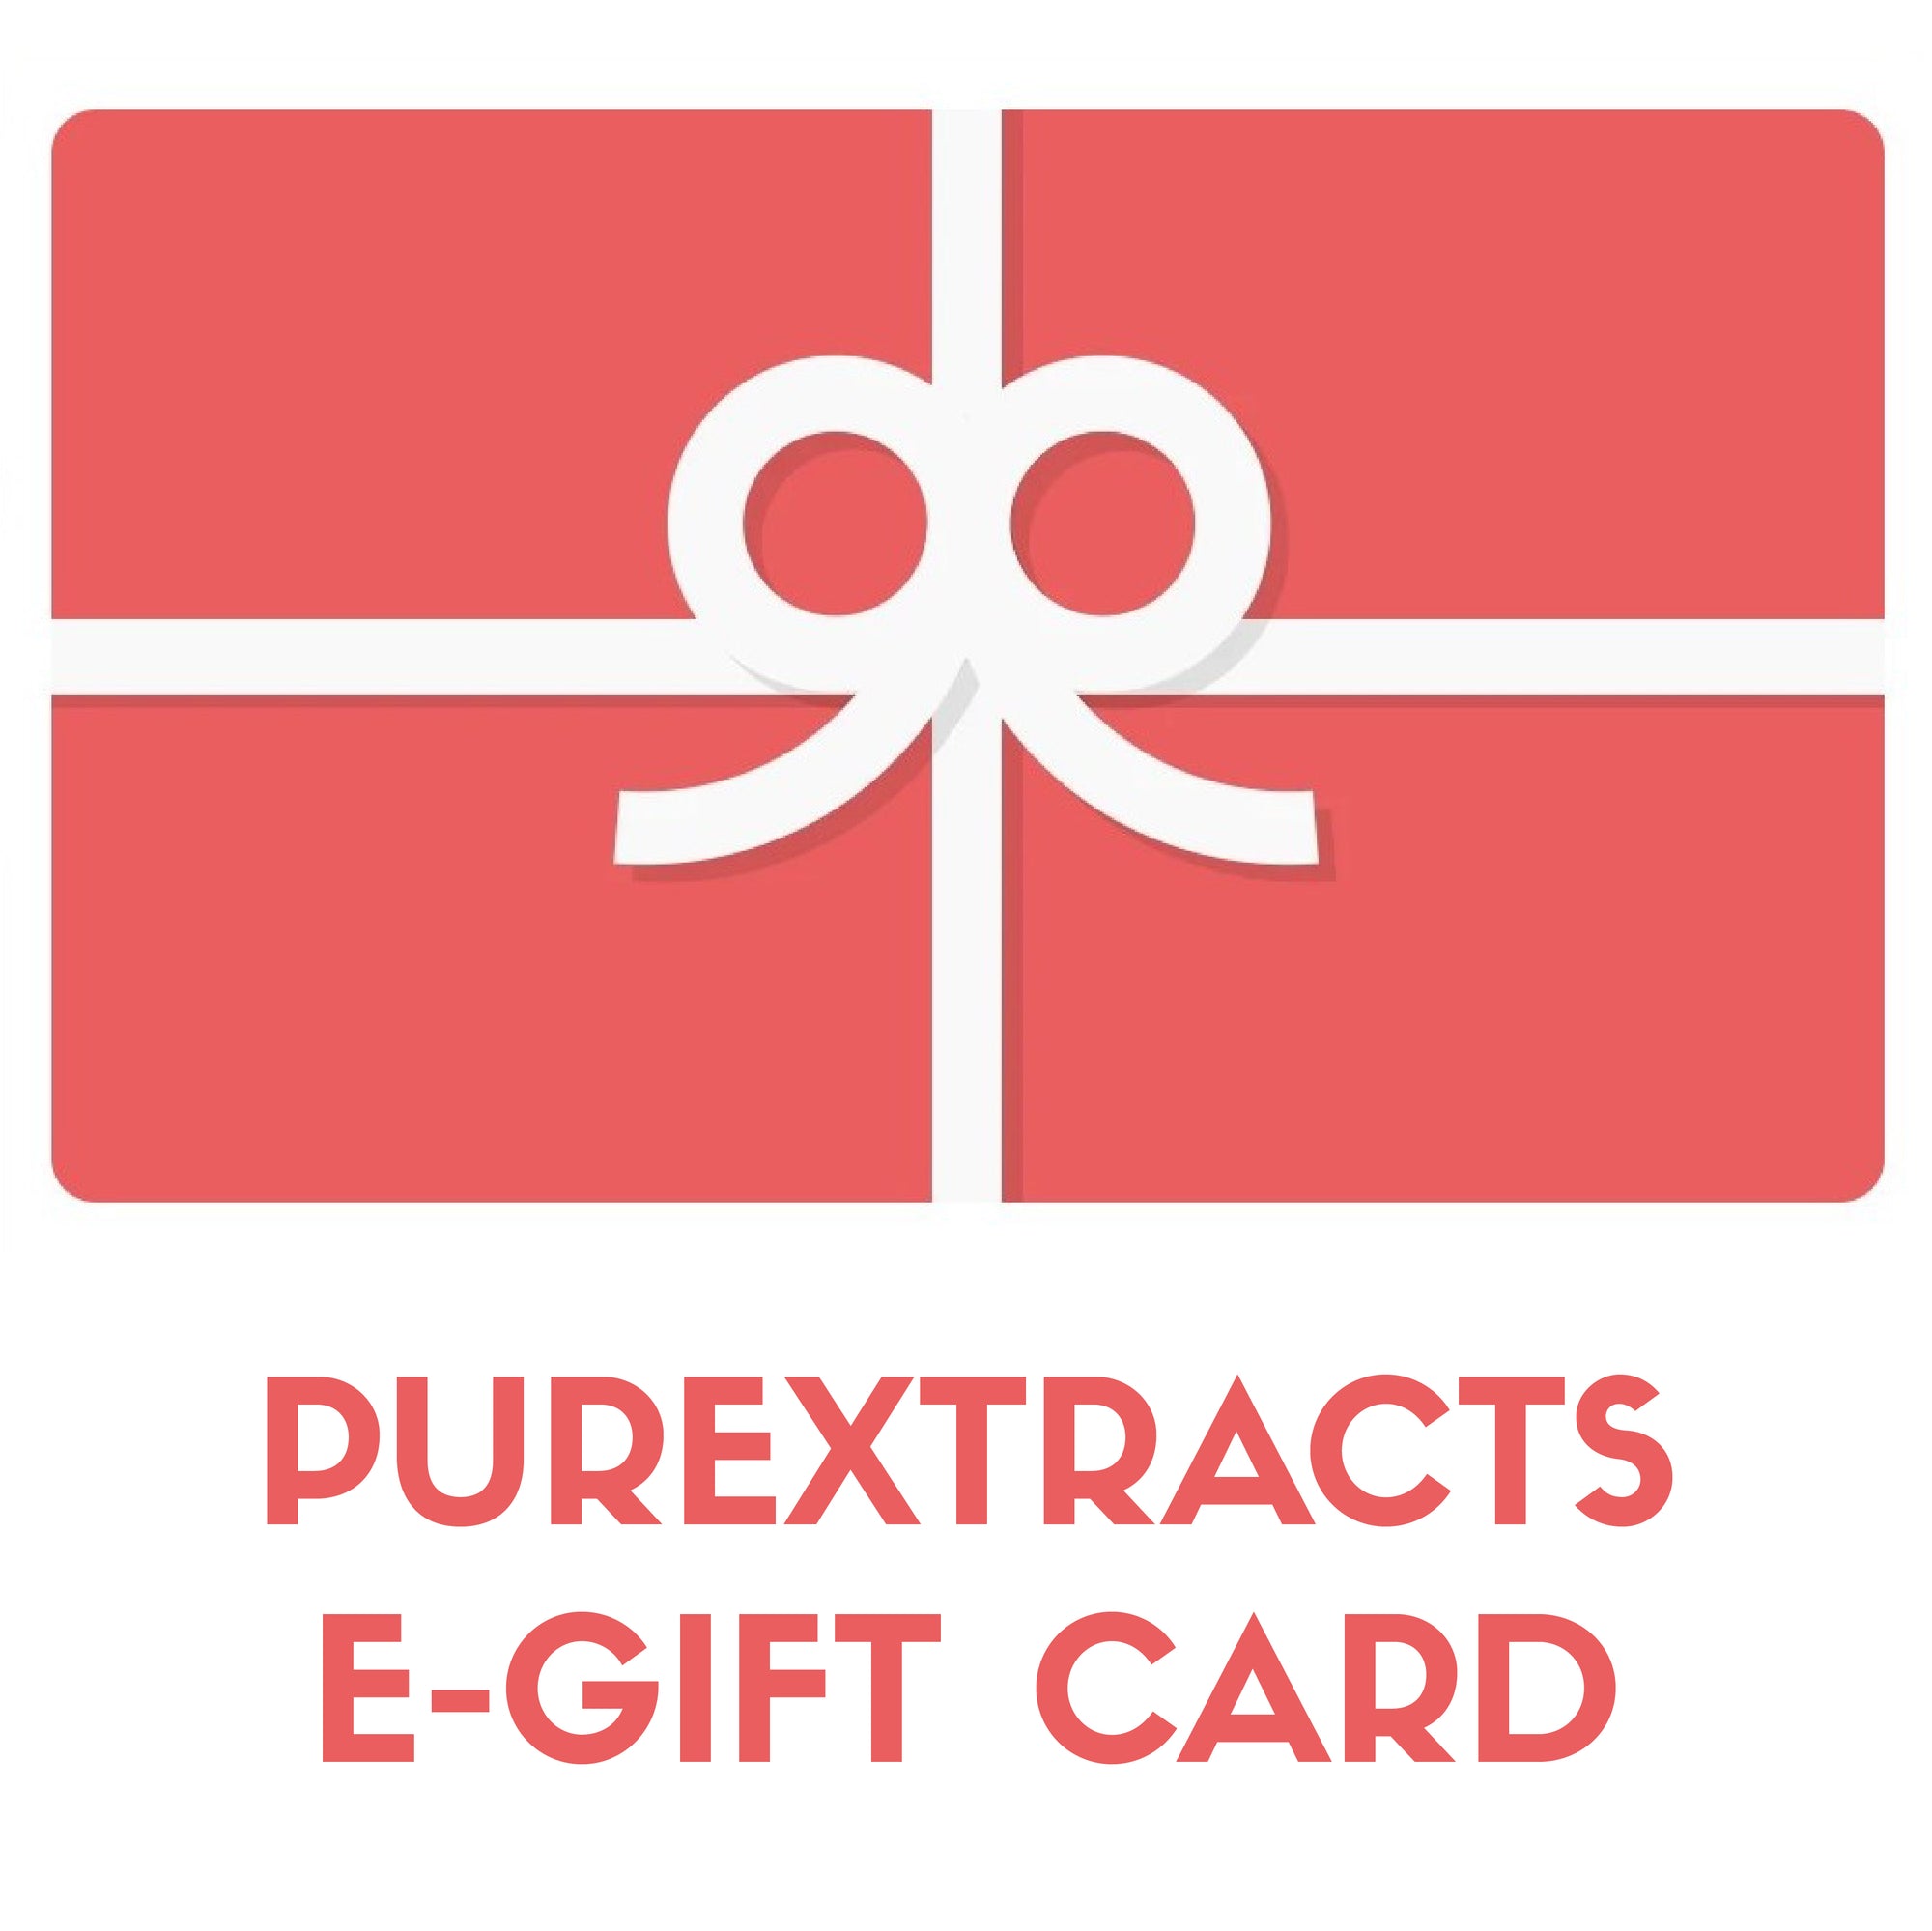 Purextracts e-gift card